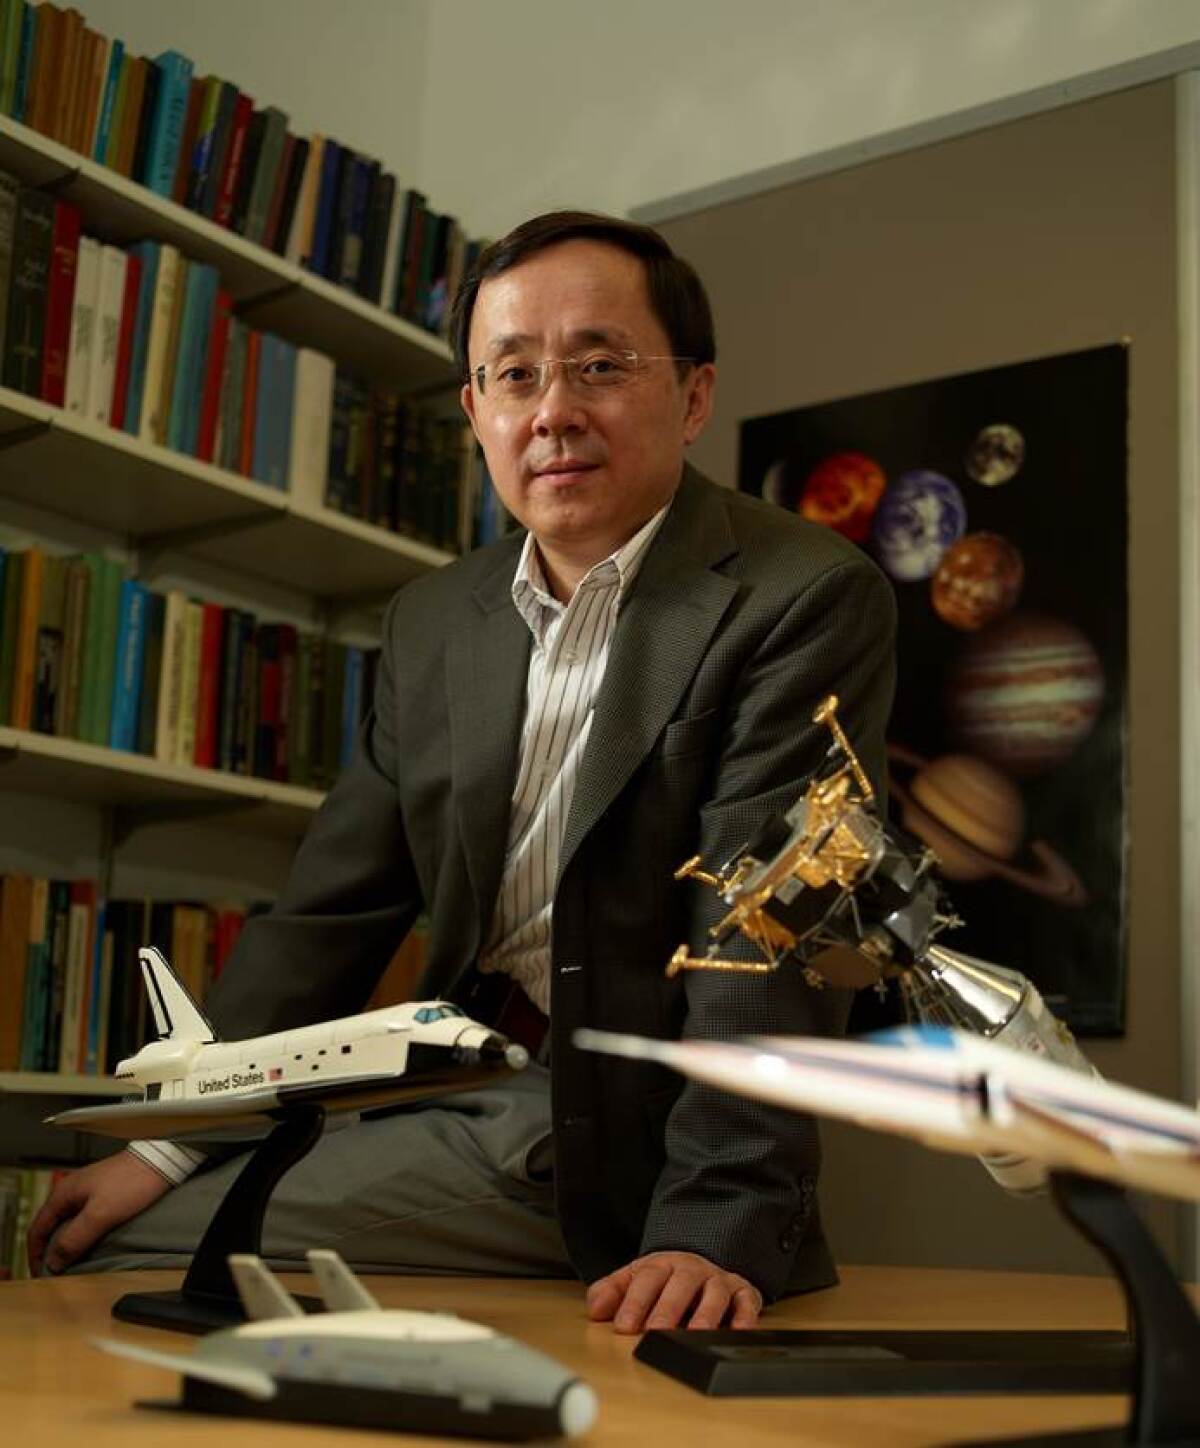 Ping Lu is a professor and chair of the Department of Aerospace Engineering at San Diego State University.